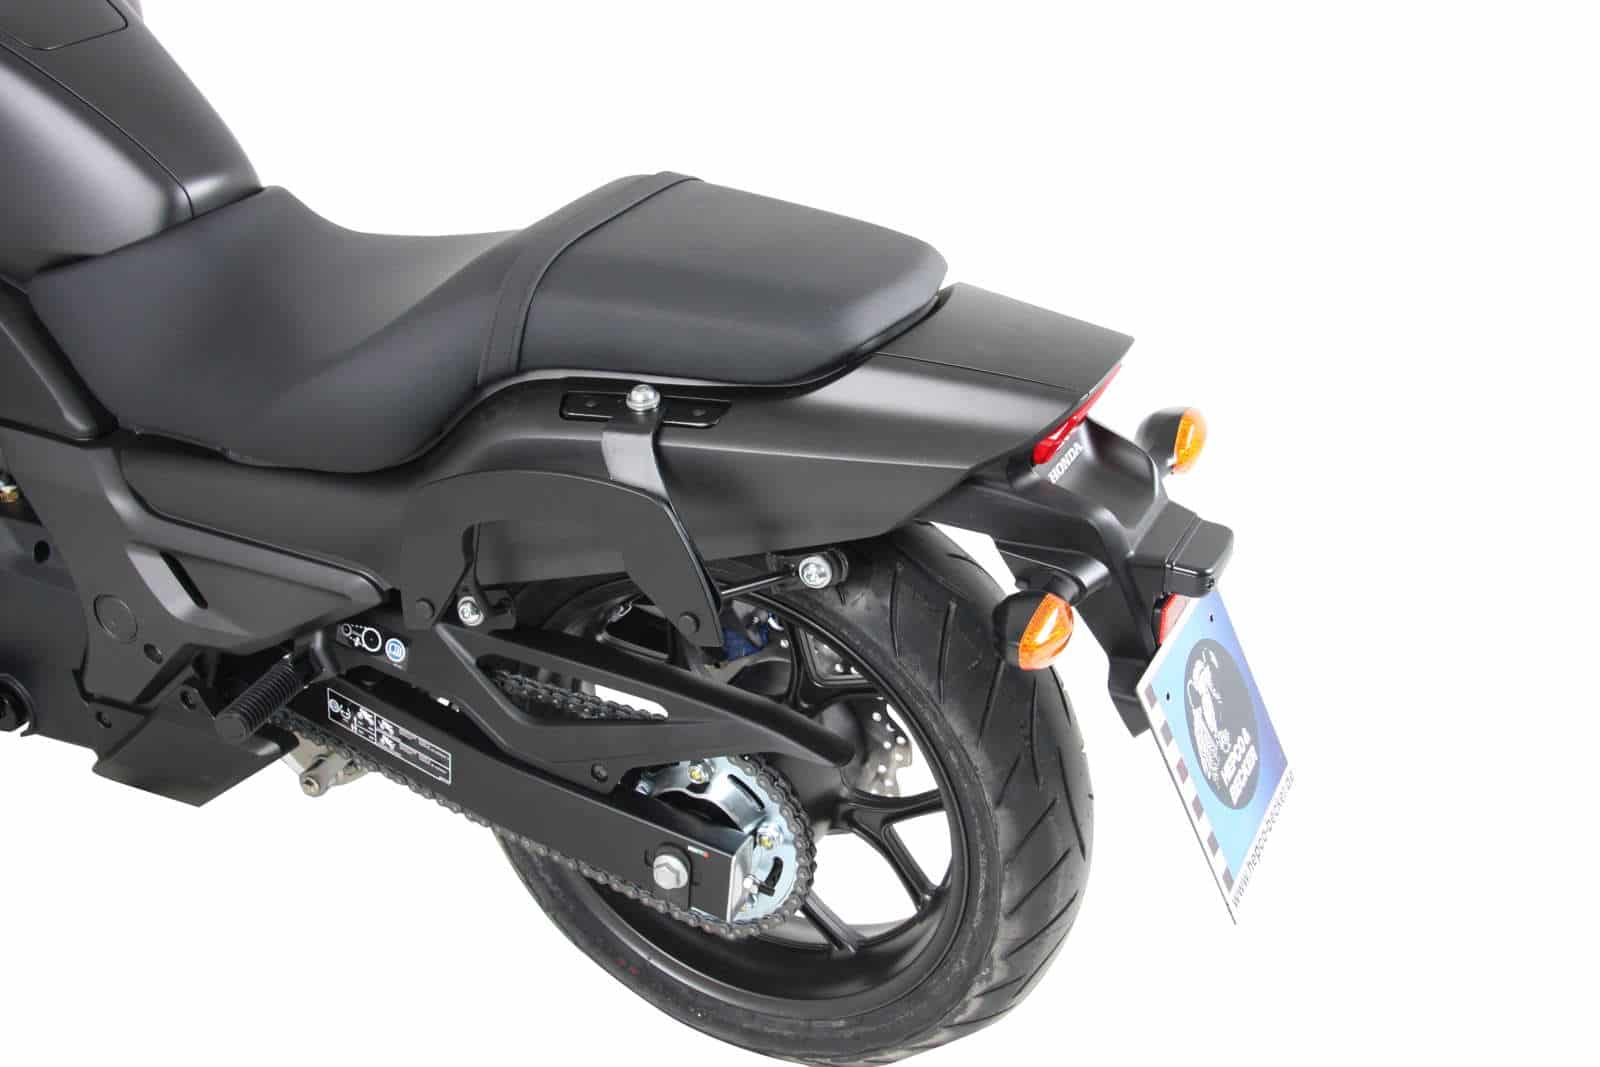 C-Bow sidecarrier Lock-it for Honda CTX 700/N/DCT (2014-)